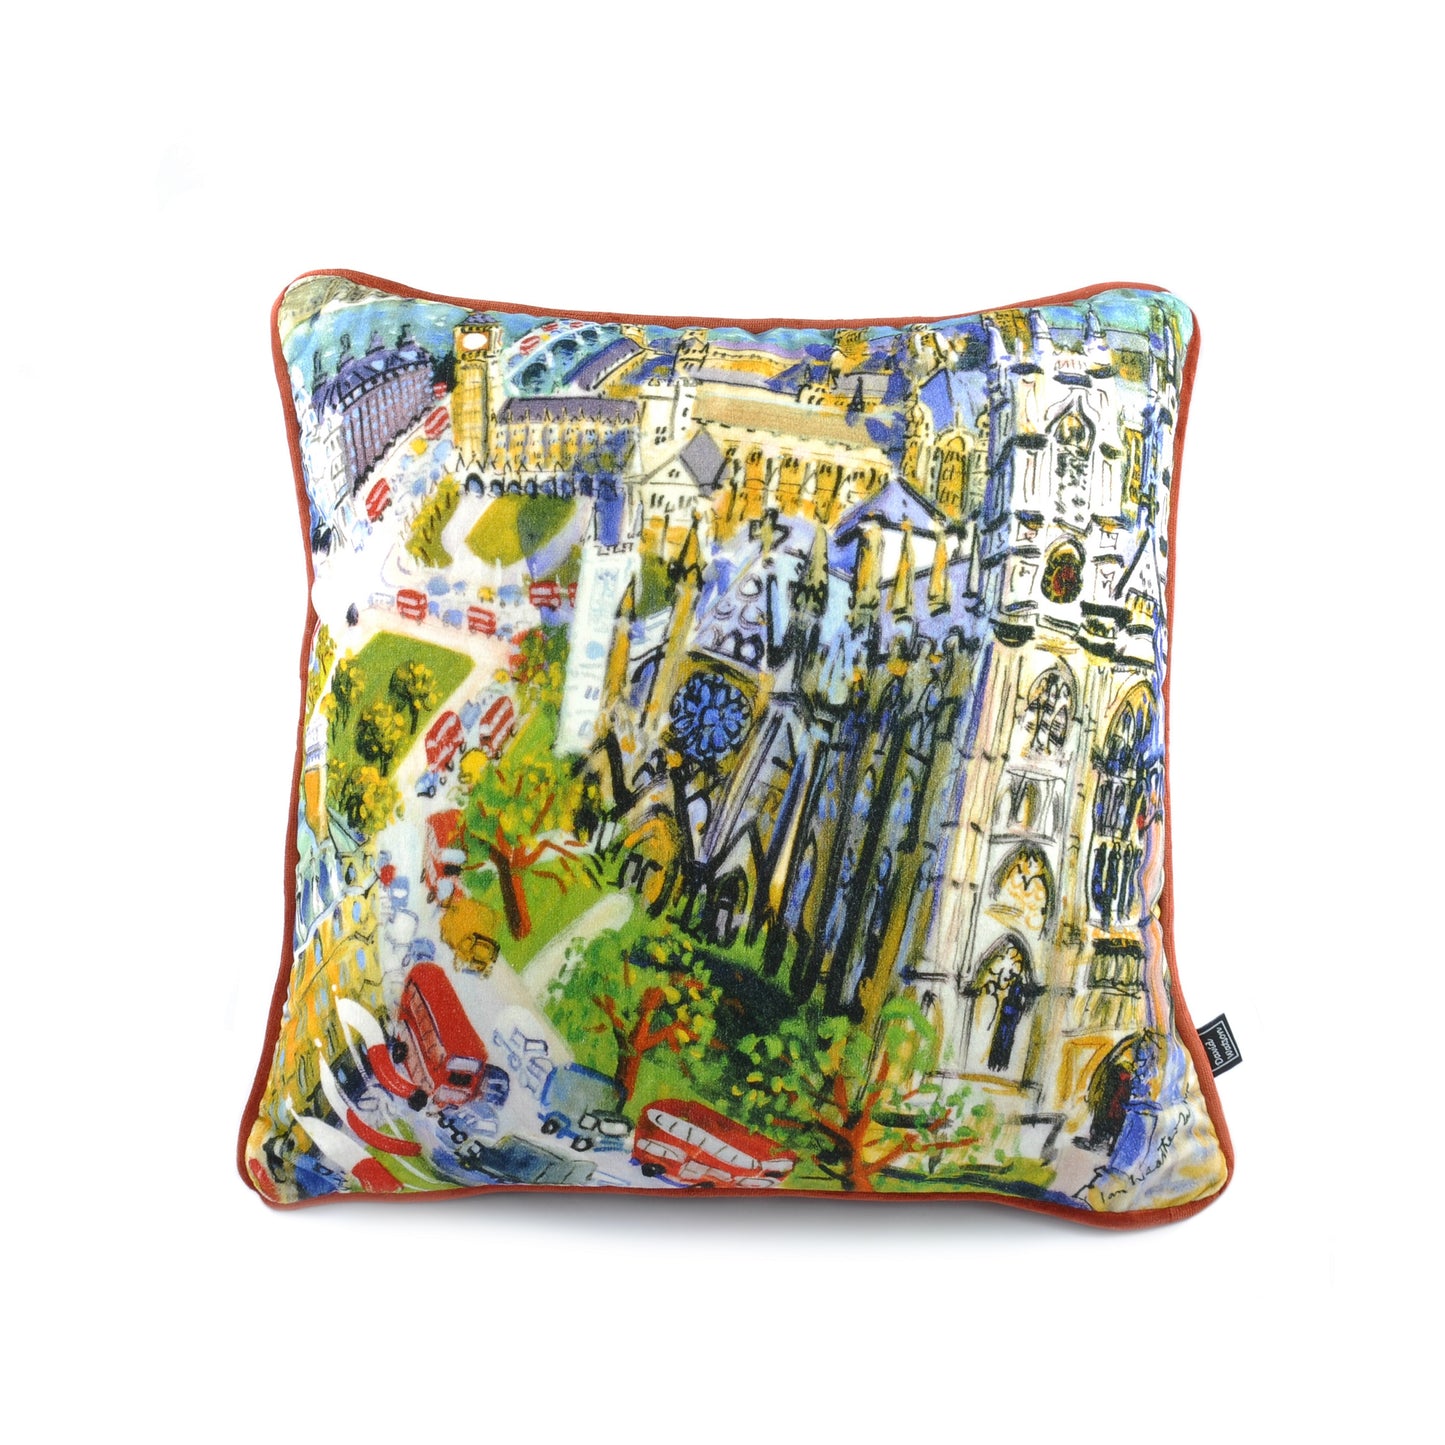 Luxury filled duck feather cushion with colourful London cotton velvet cover with Ian Weatherhead original artwork and piped edging.